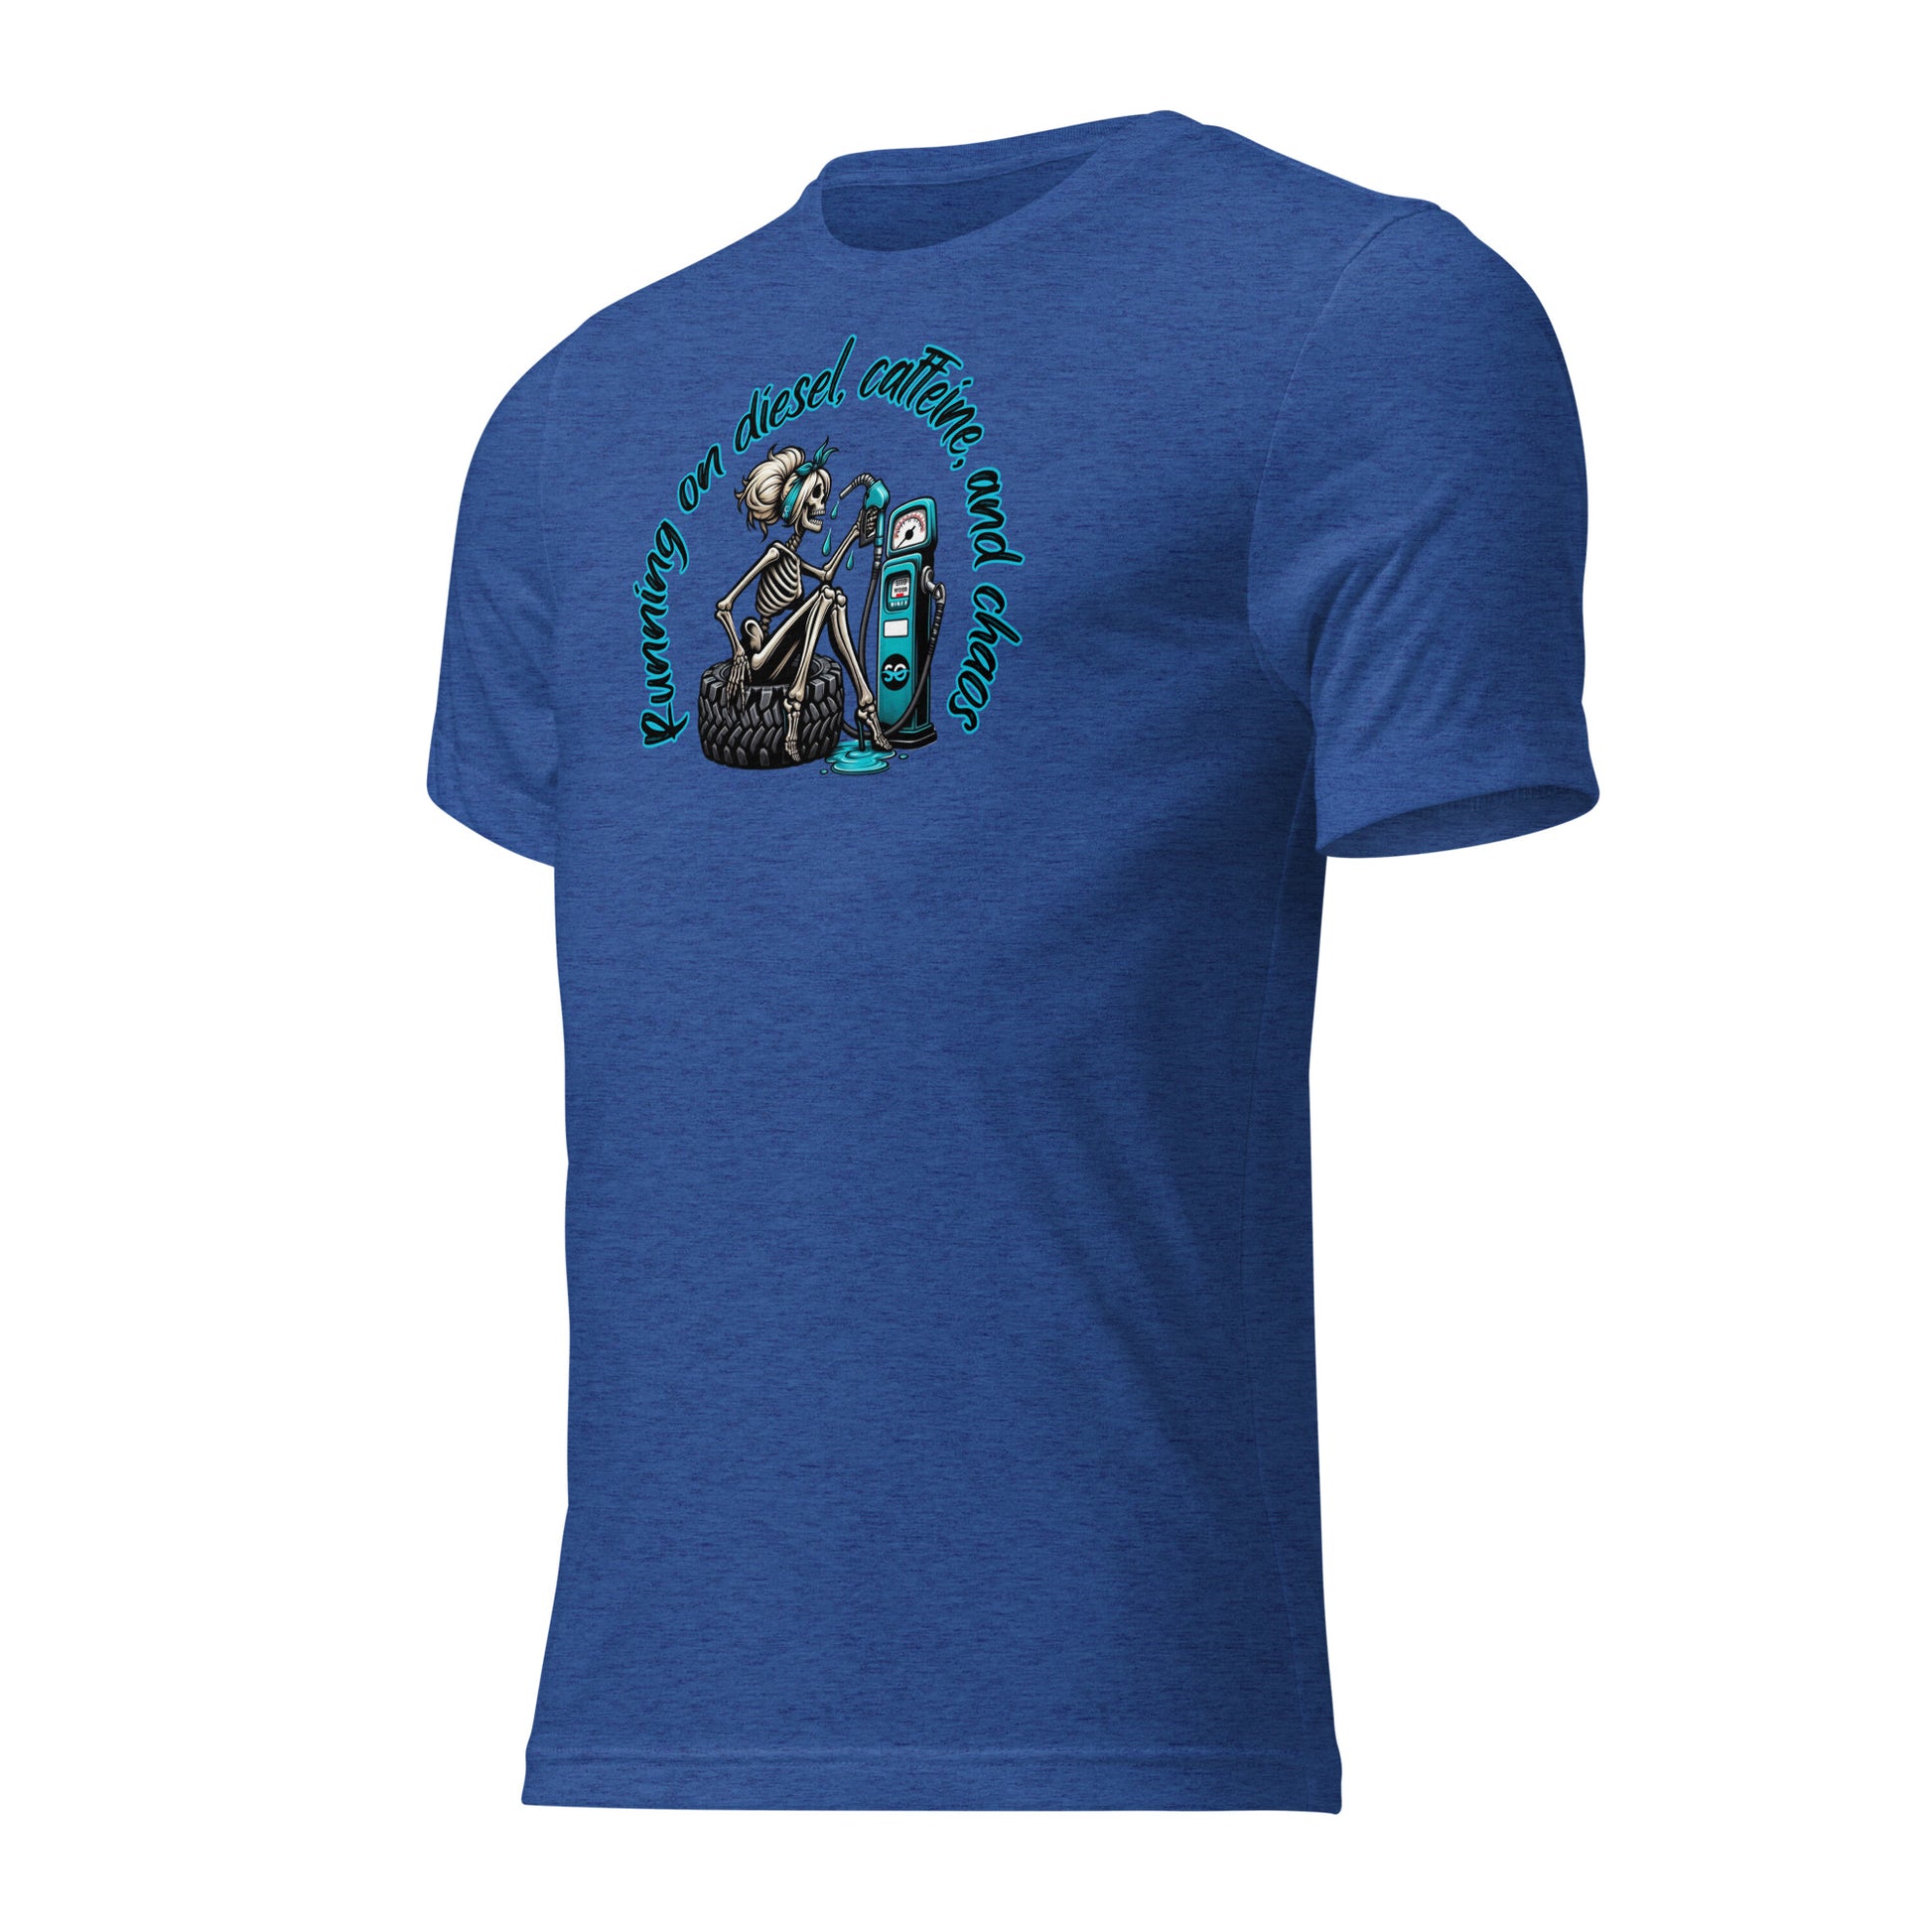 a blue t - shirt with an image of a skeleton holding a skateboard